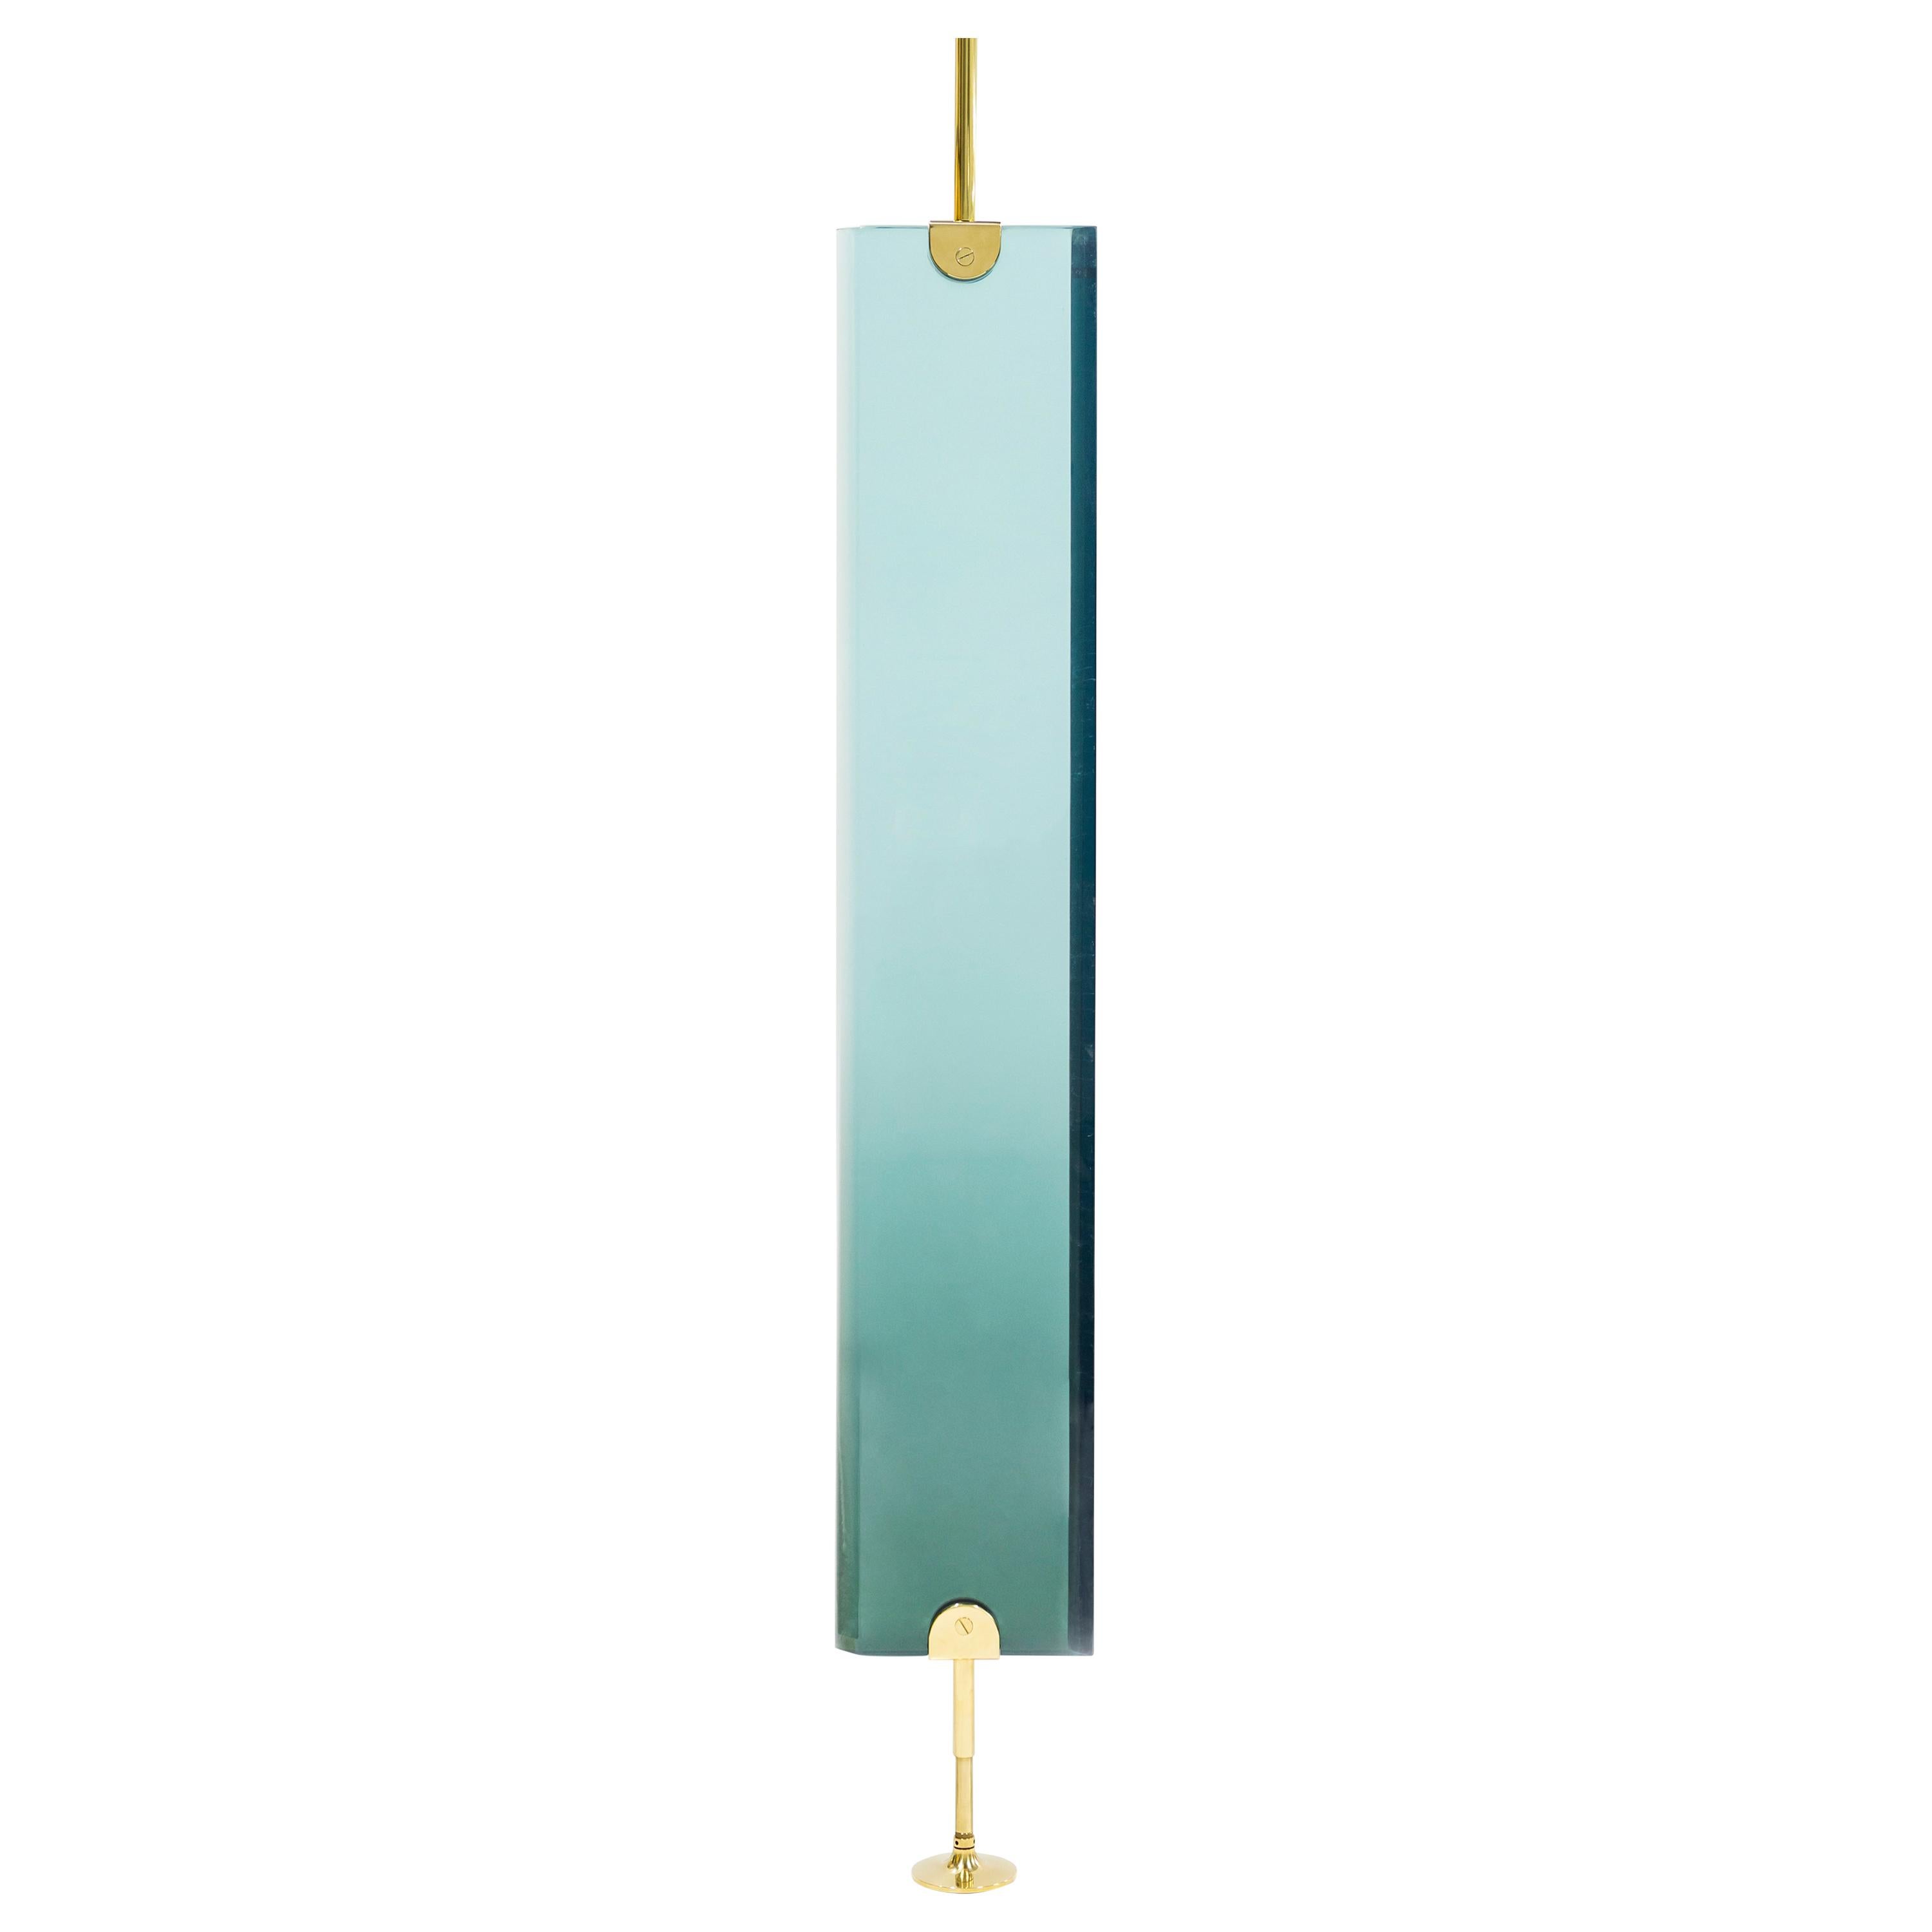 Reverso Separè Jade by Draga&Aurel Resin and Brass, 21st Century For Sale